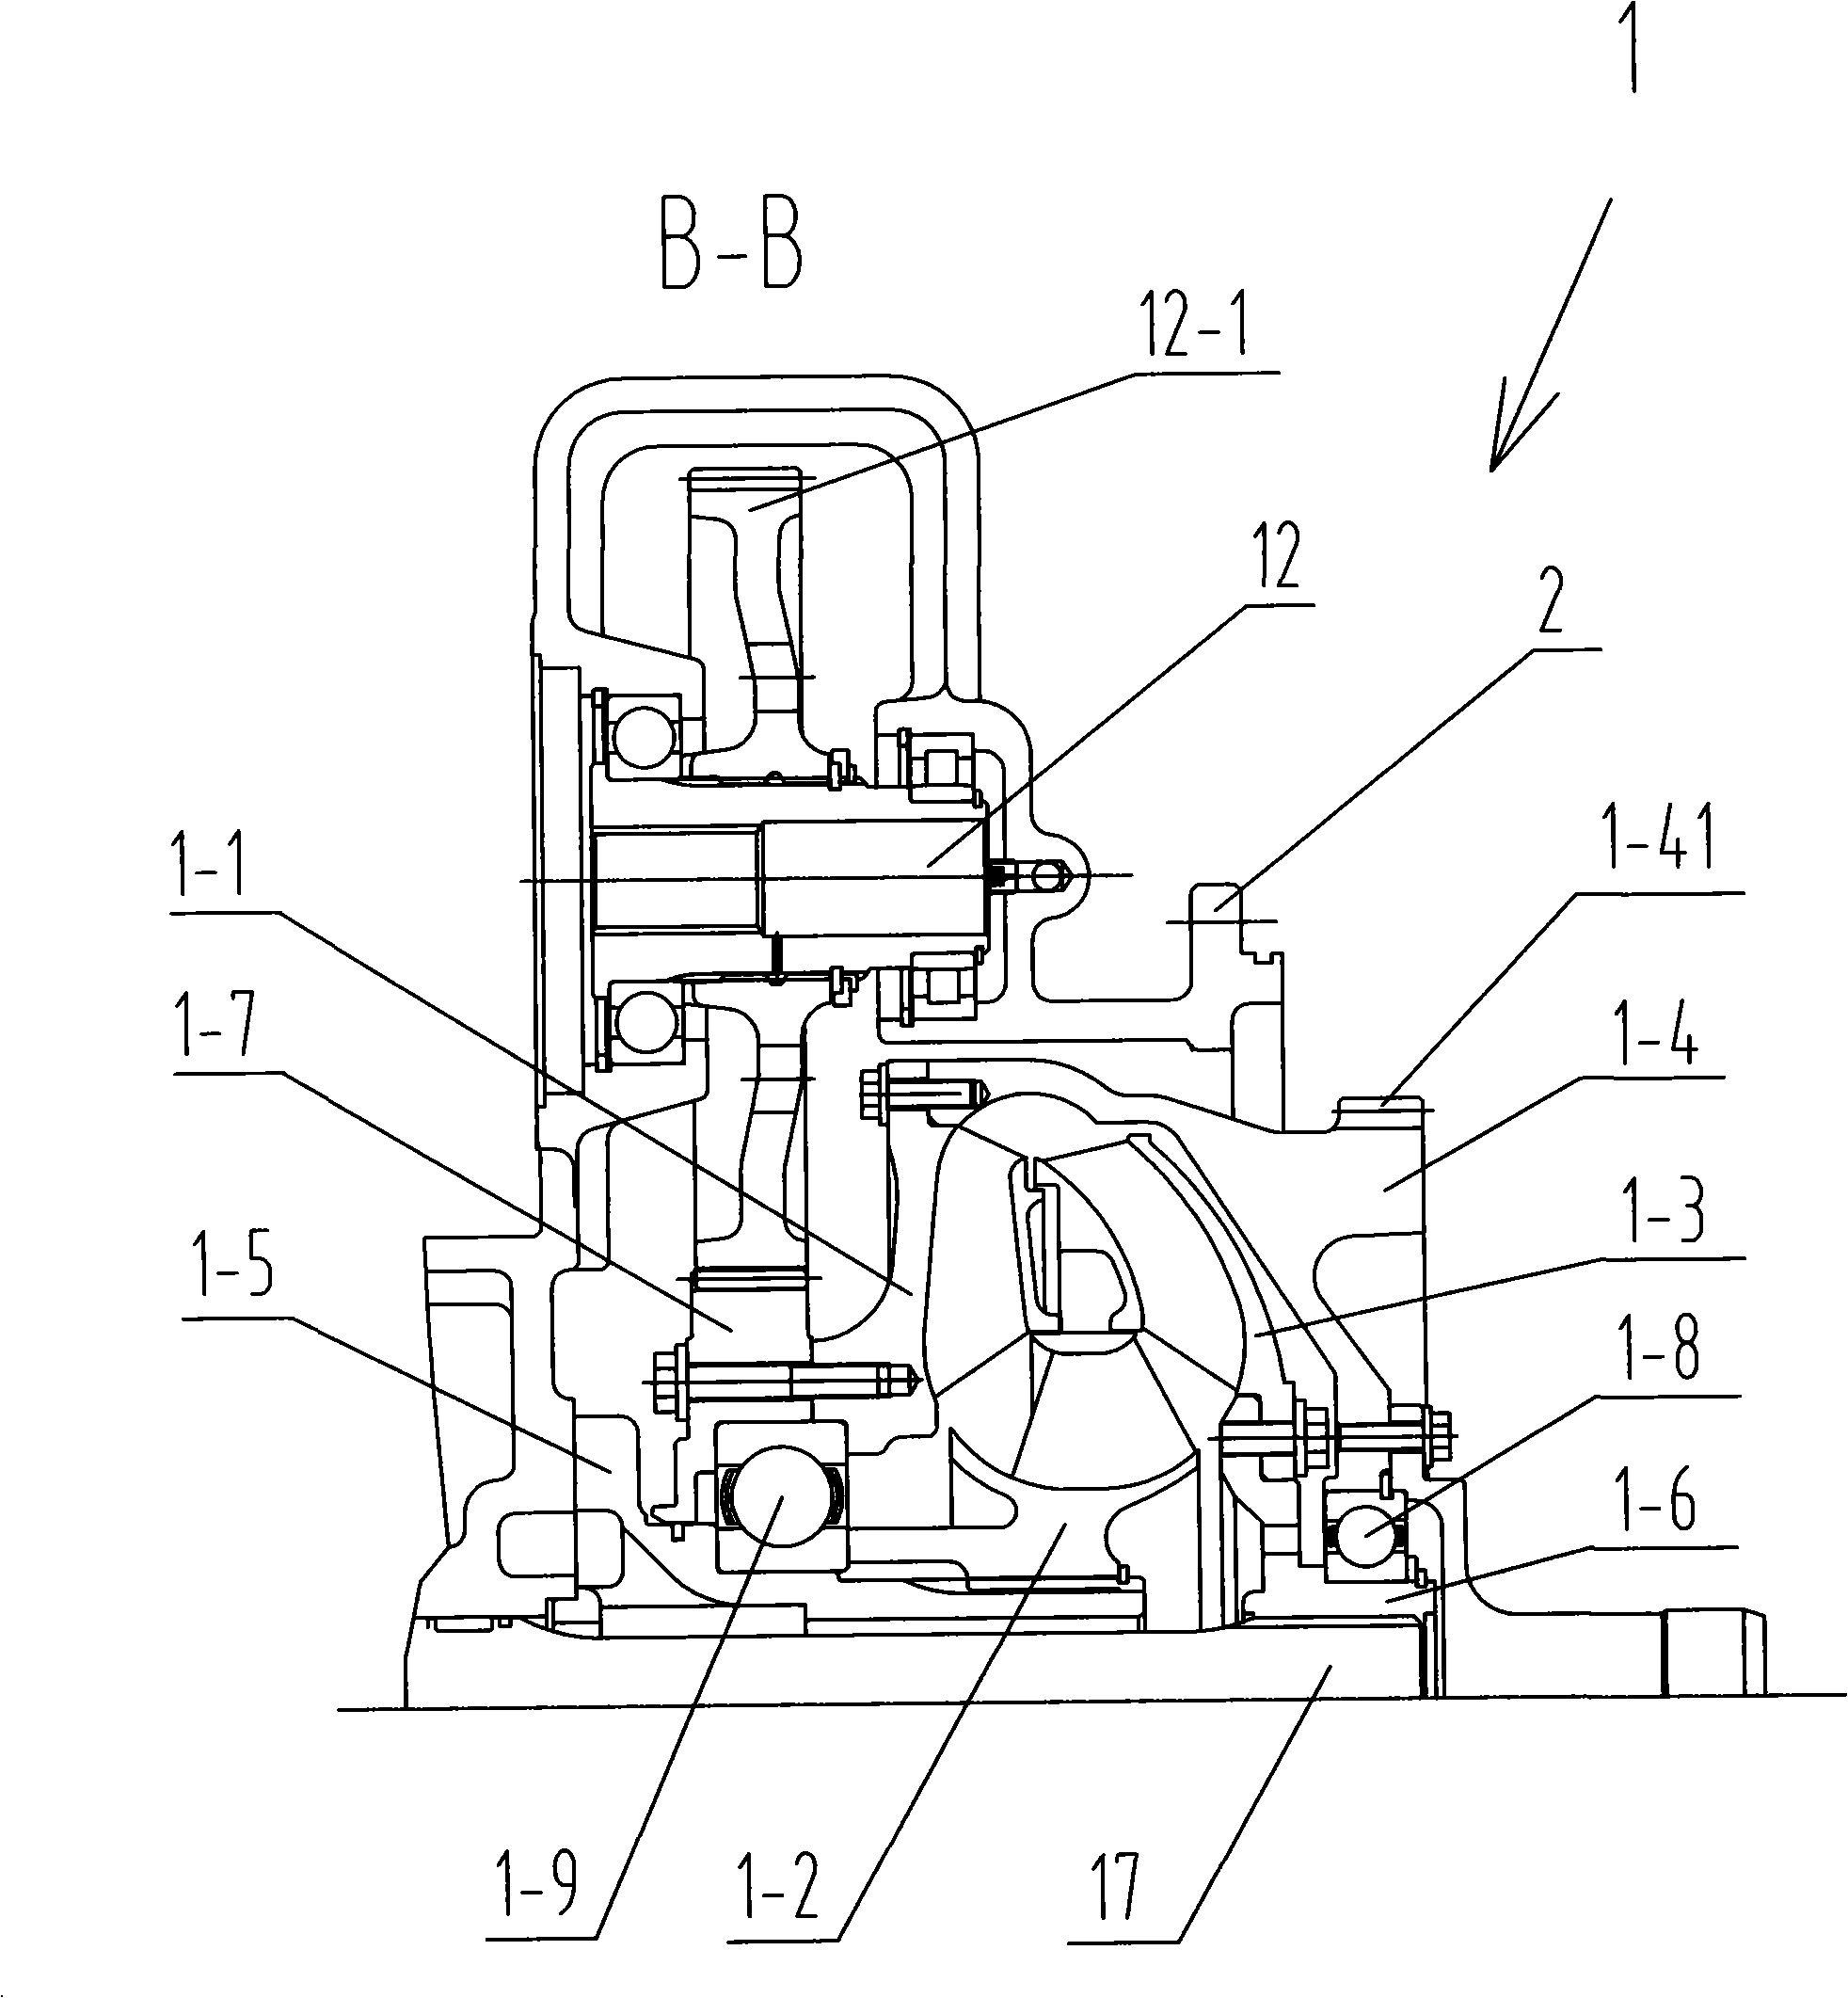 Transmission mechanism of integral power shift hydraulic transmission for engineering machinery